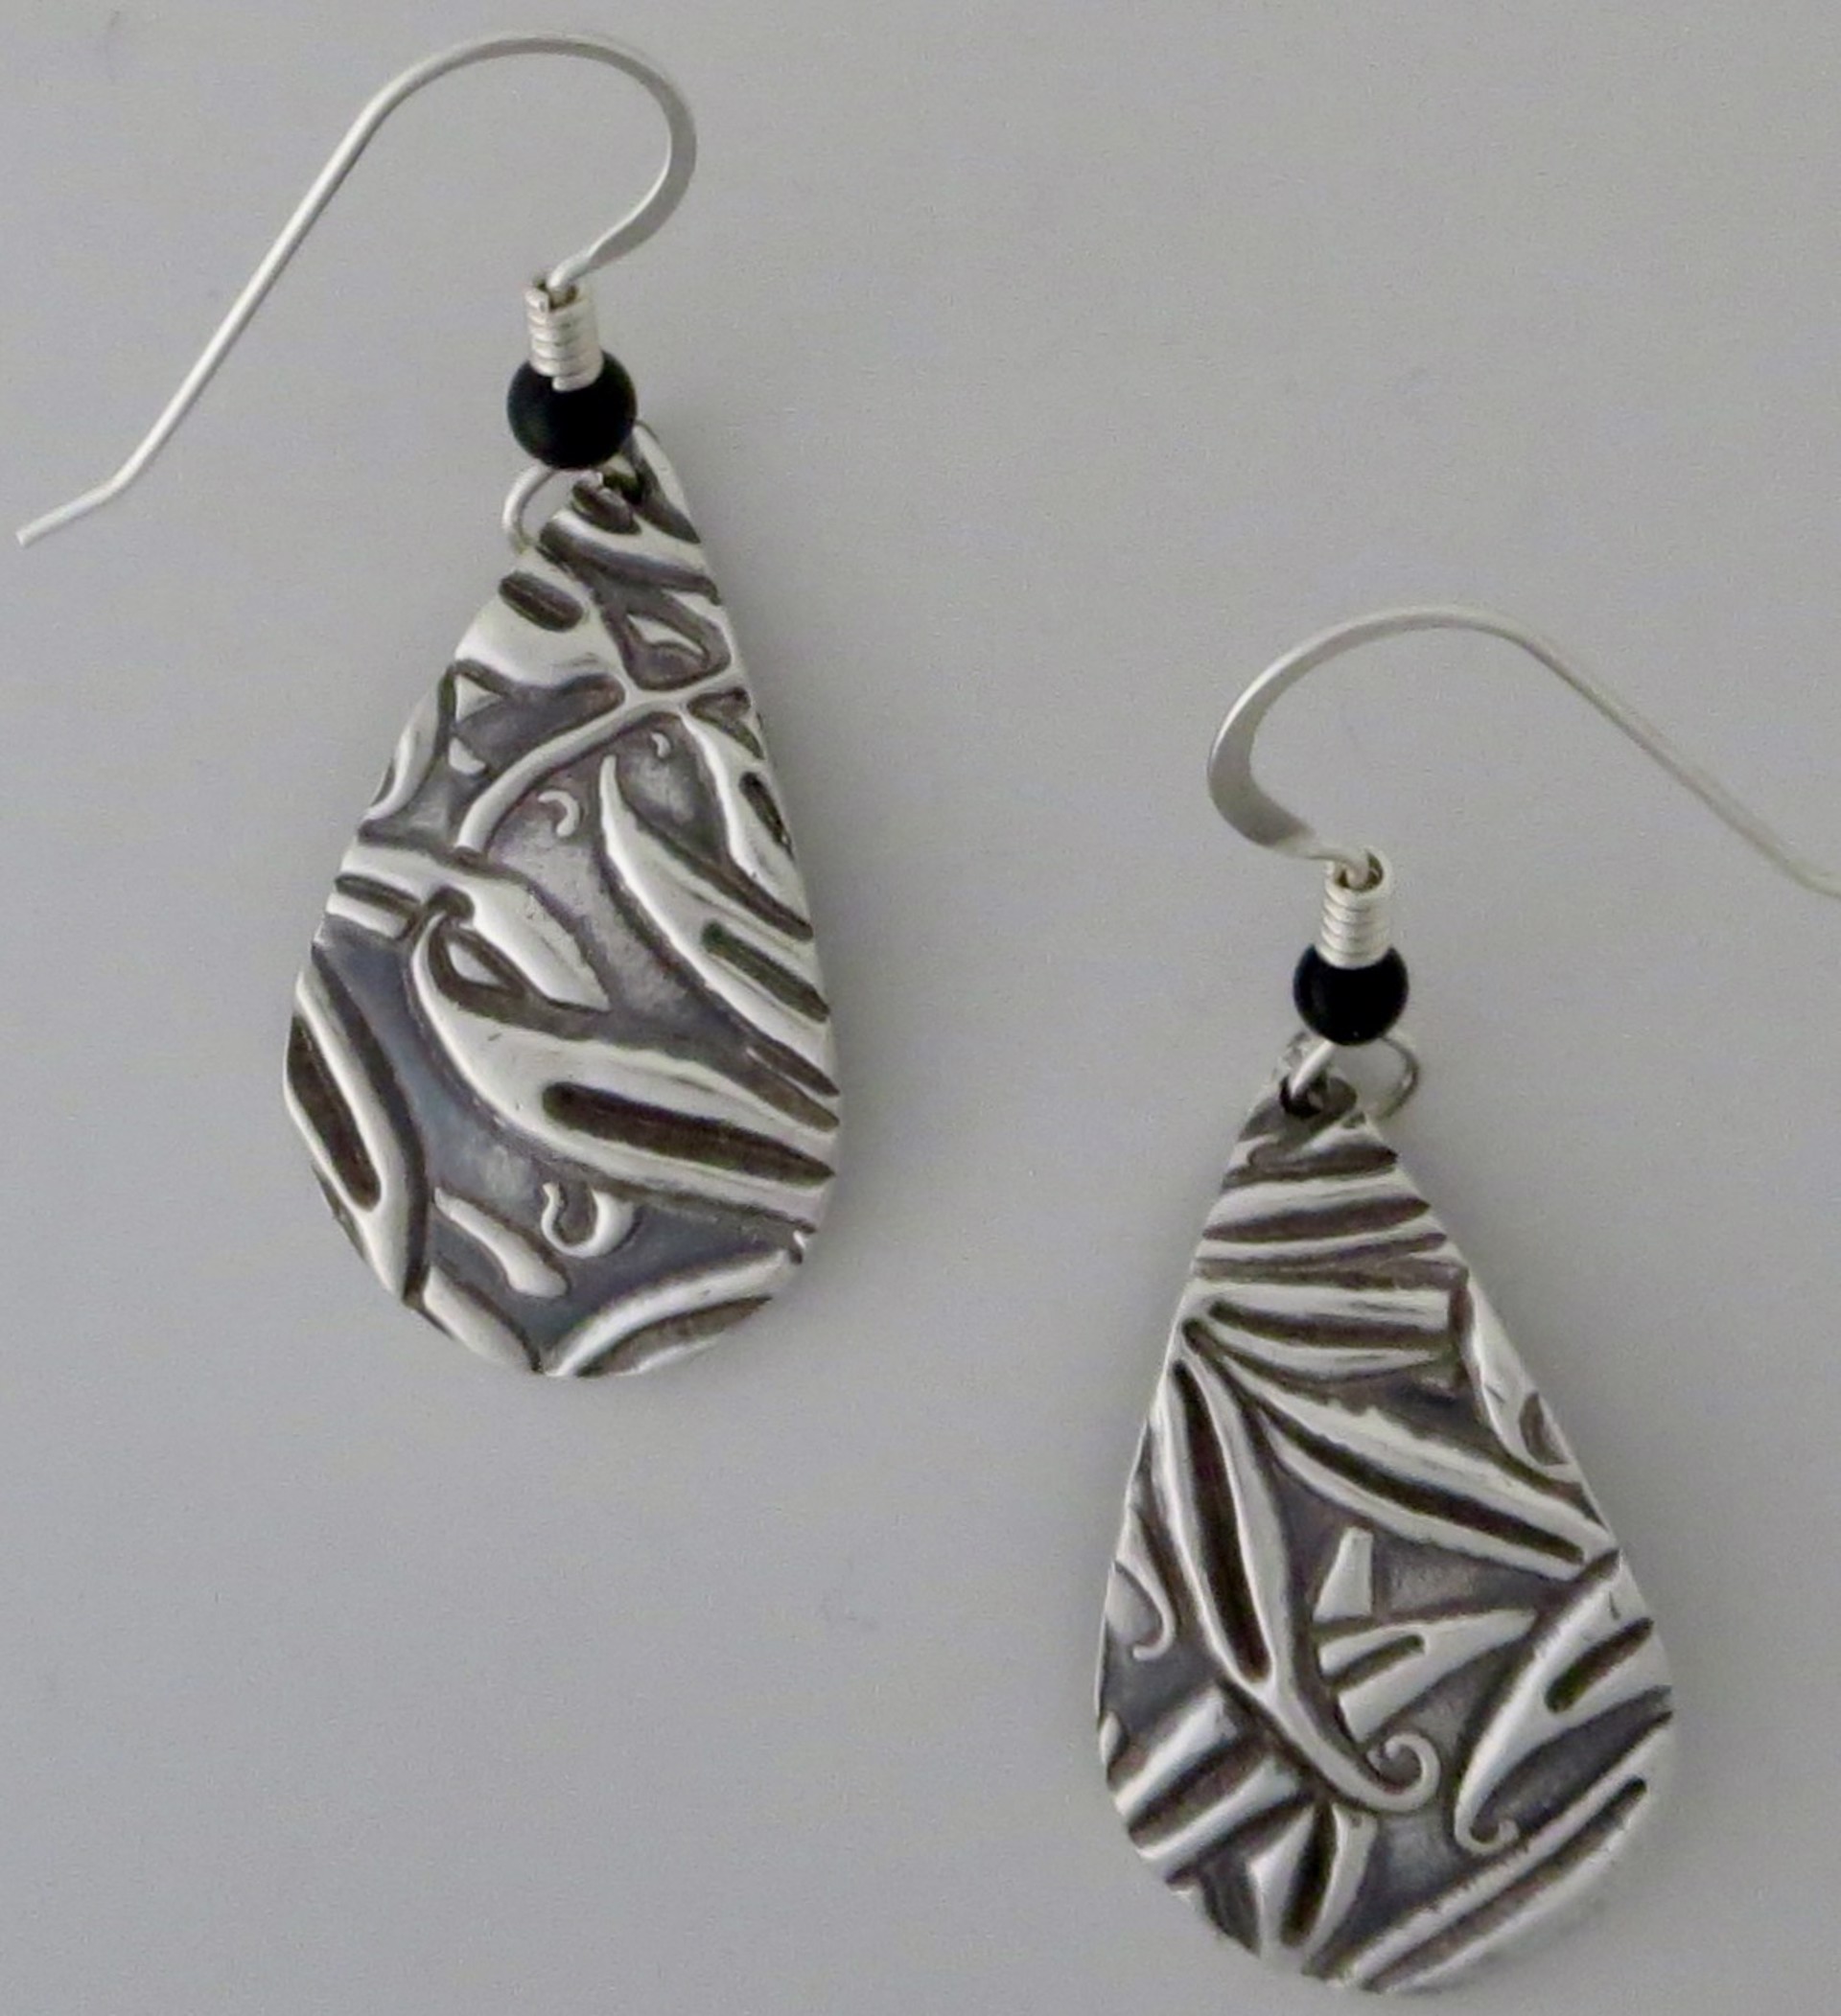 M-957 Earrings by Donna Rittorno